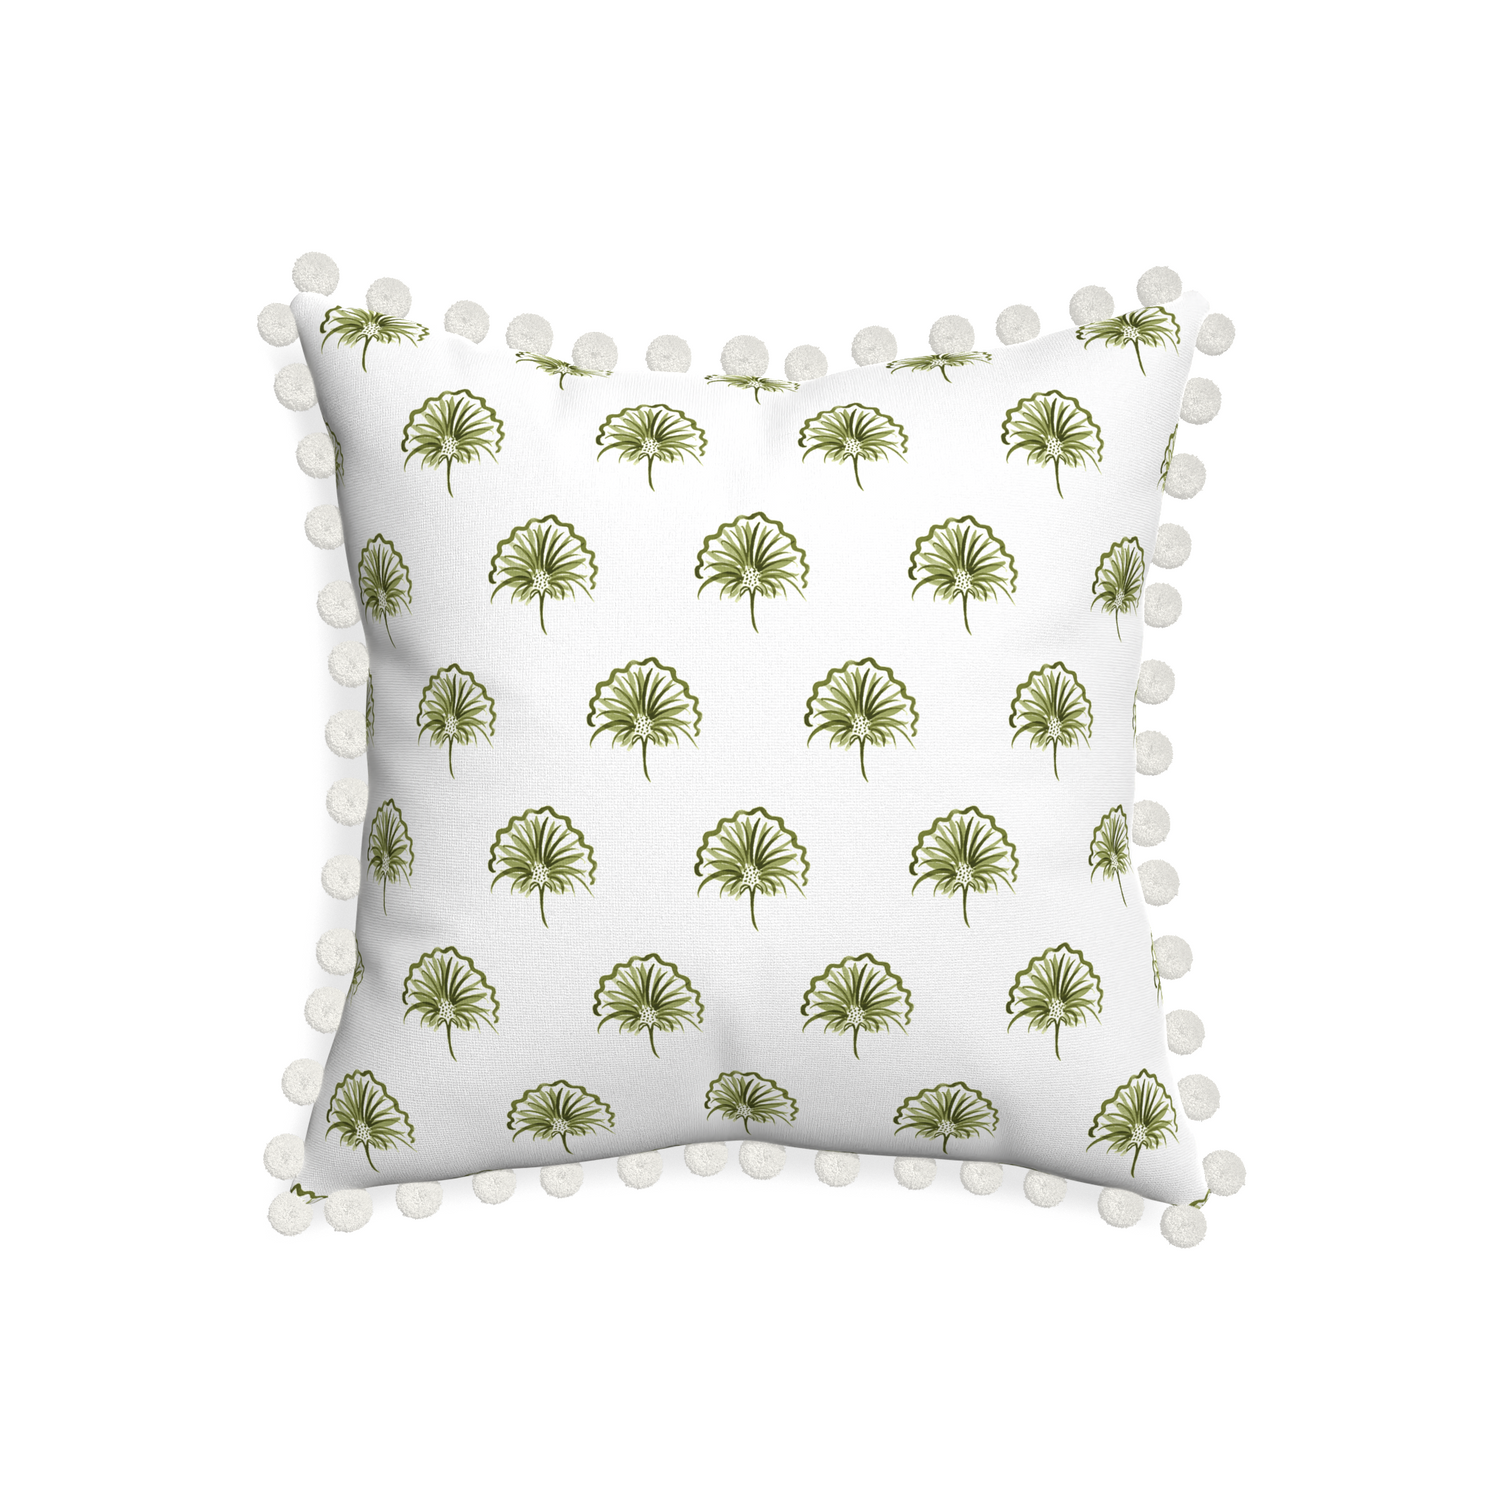 20-square penelope moss custom green floralpillow with snow pom pom on white background